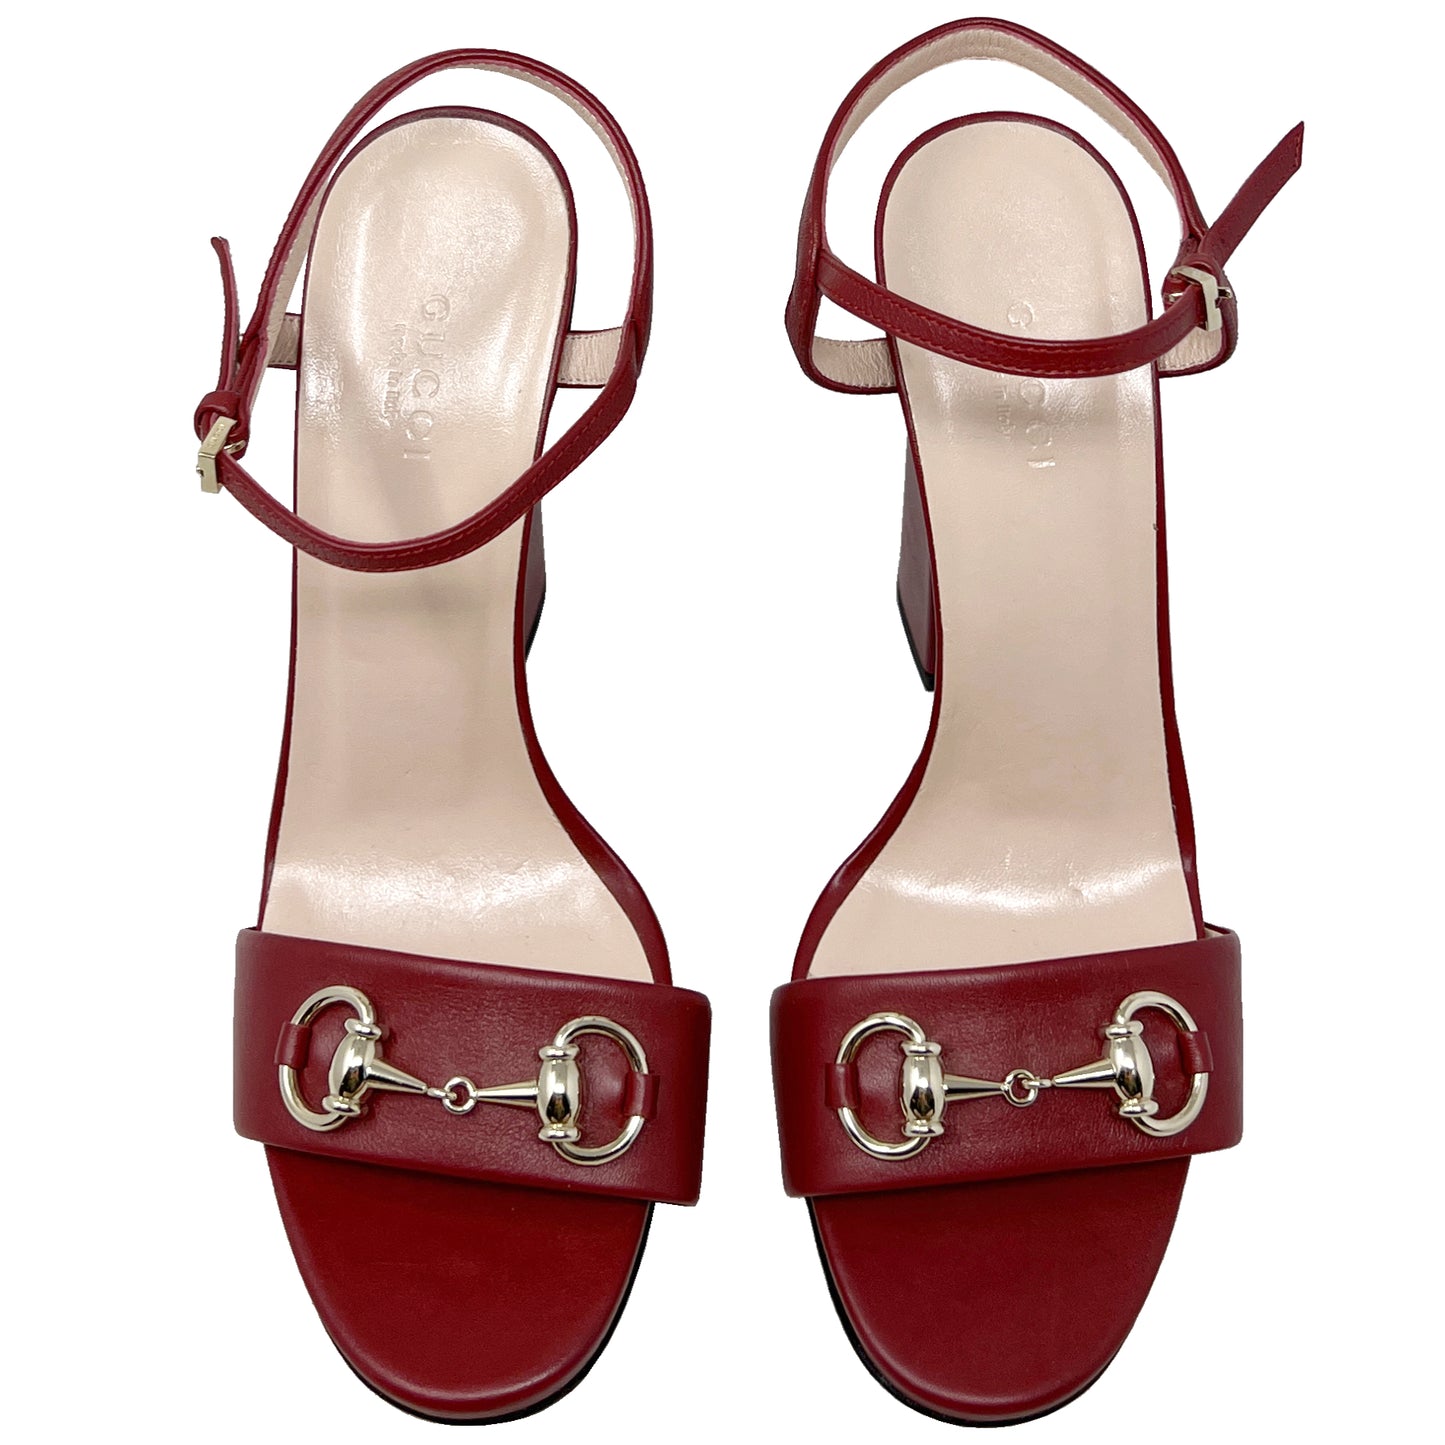 Gucci Red Leather Horsebit Ankle Strap Open Toe Block High Heel Sandals Size EU 37.5